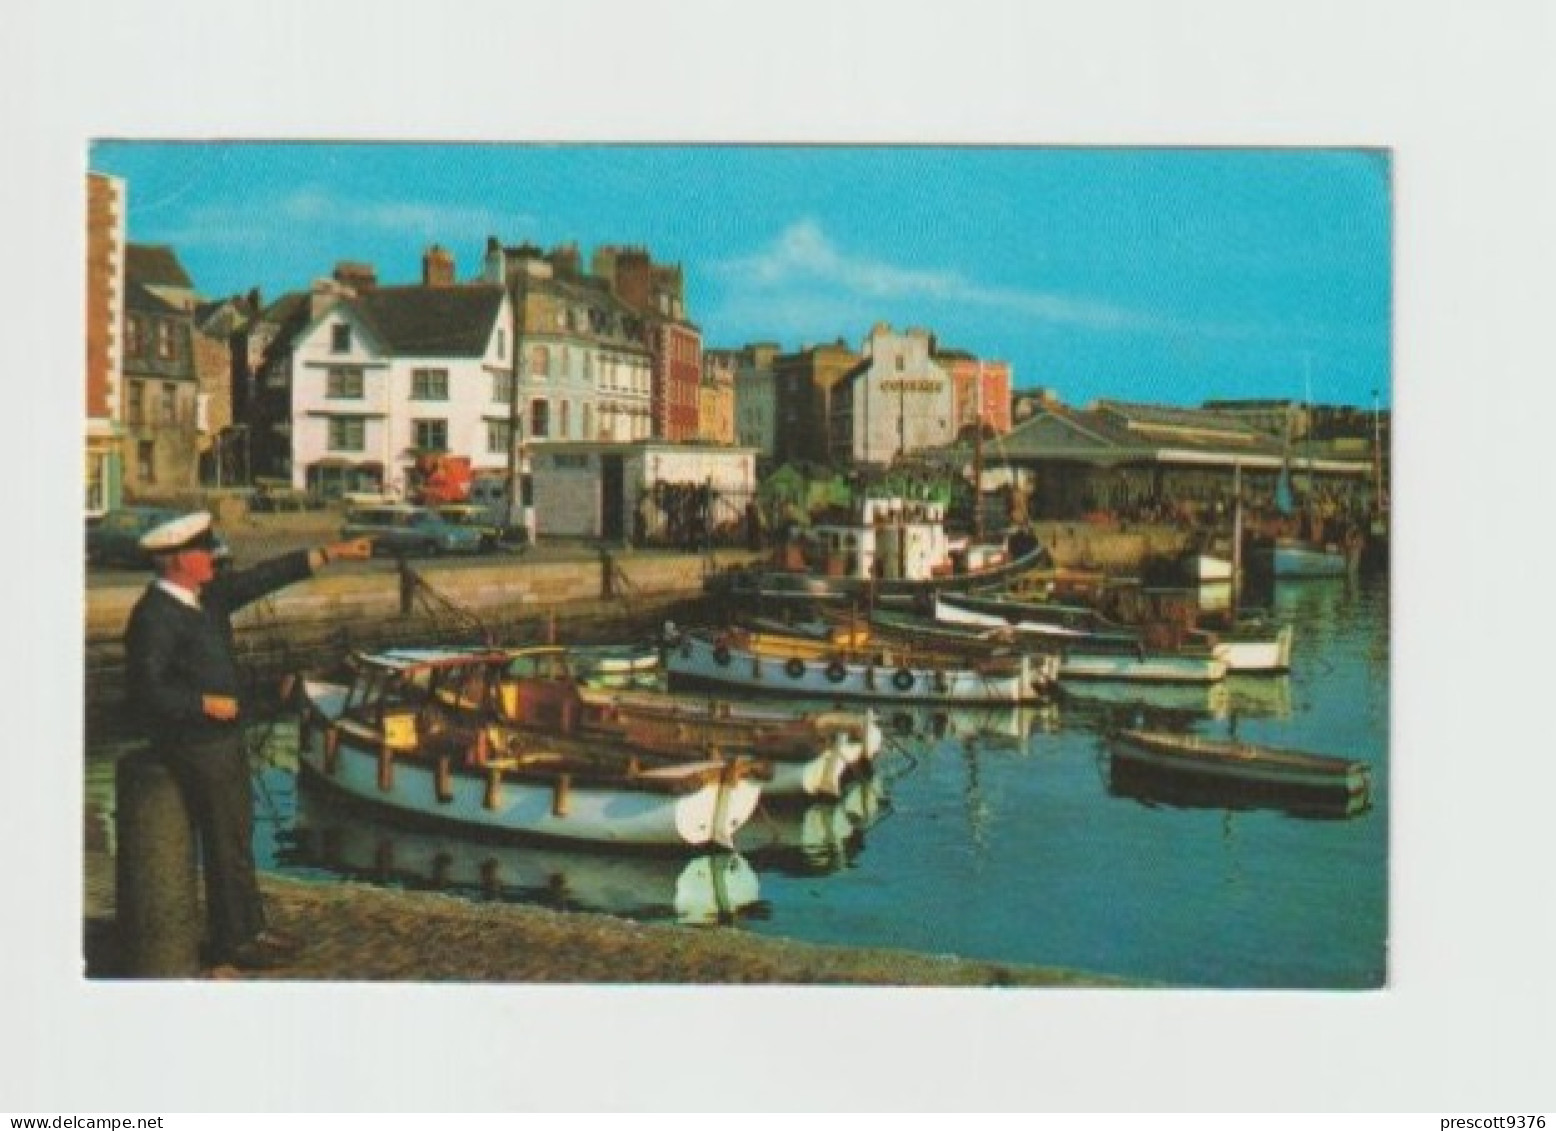 The Barbican, Plymouth  - Unused Postcard - UK23 - - Plymouth